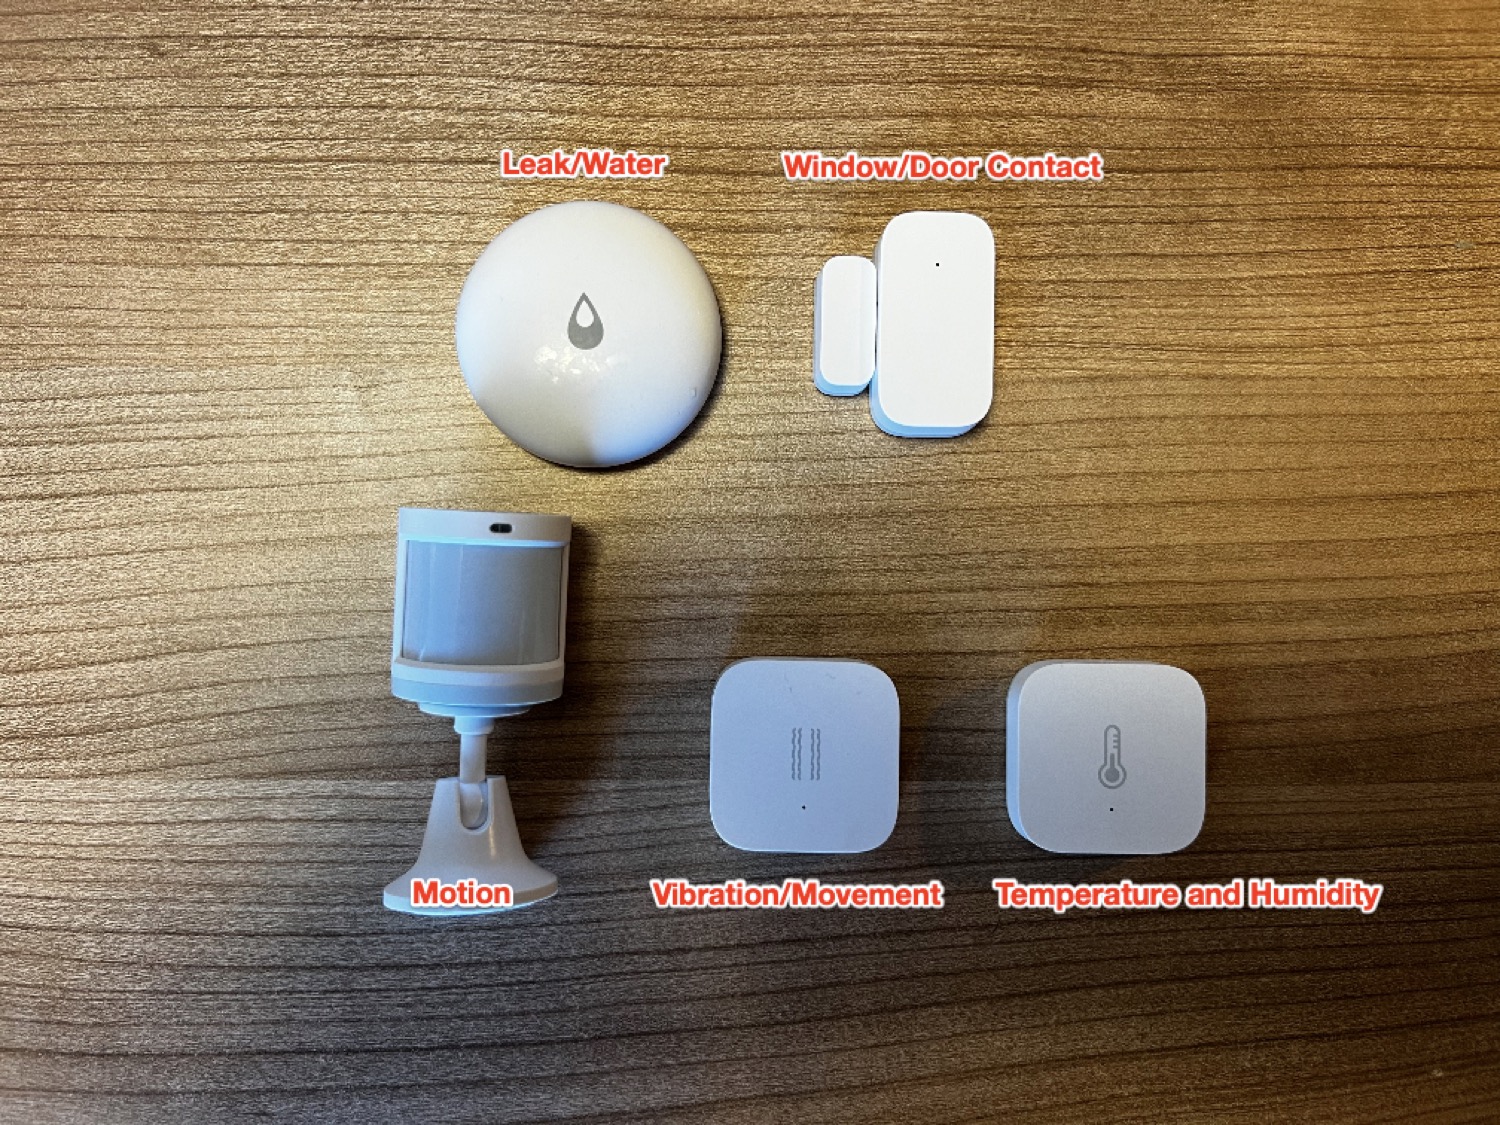 Various [Aqara](https://www.aqara.com/eu/products.html) Zigbee sensors I use. A big benefit of Zigbee over Z-wave is price. Each of these sensors costs less than 25 EUR, often considerably less when ordered in bulk and/or from China.